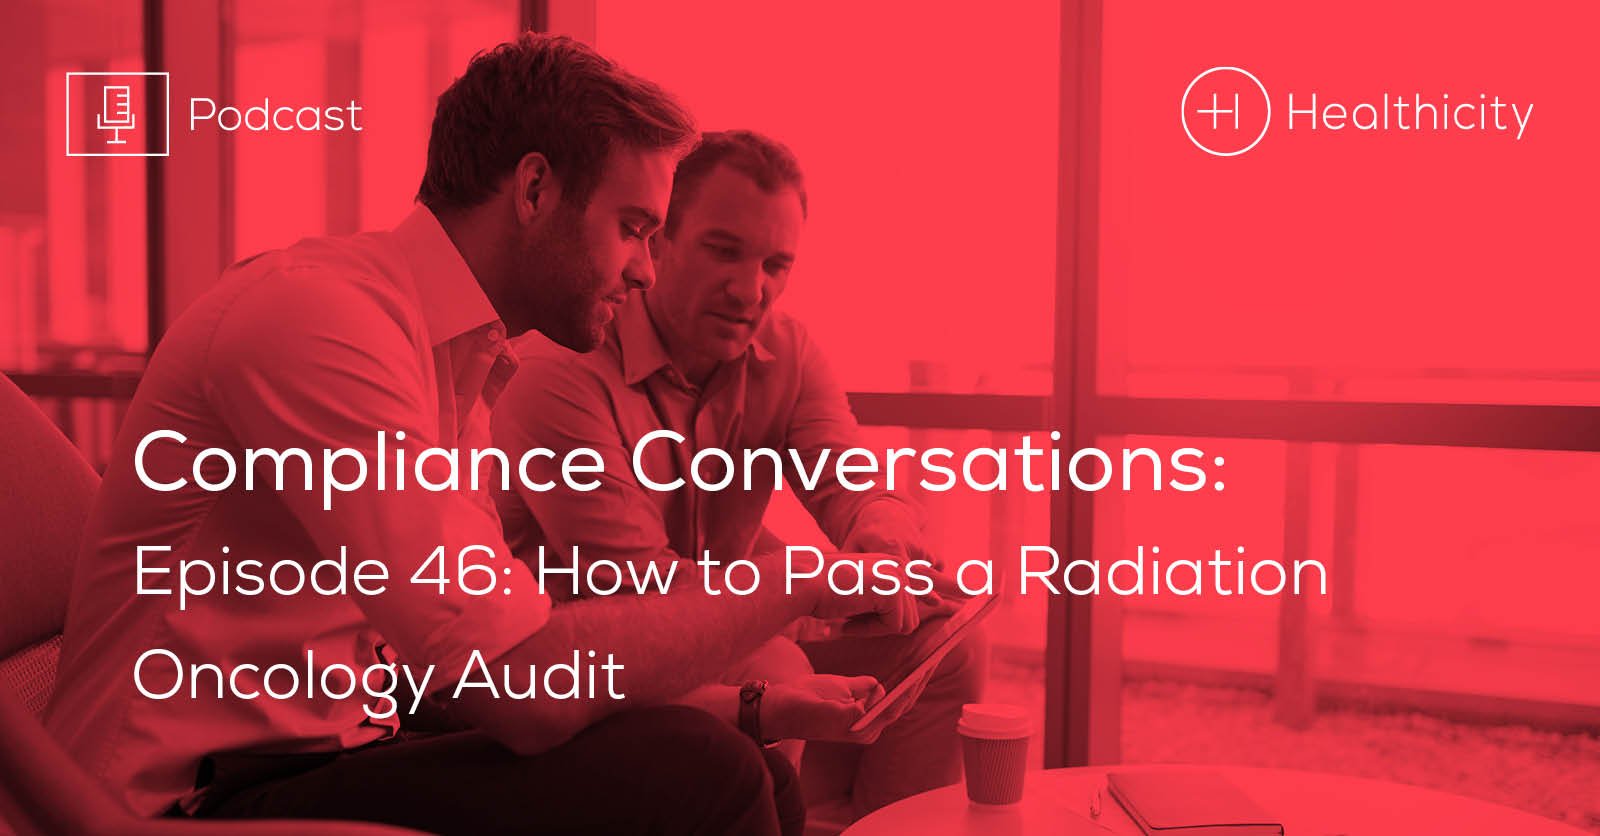 Listen to the Episode - How to Pass a Radiation Oncology Audit